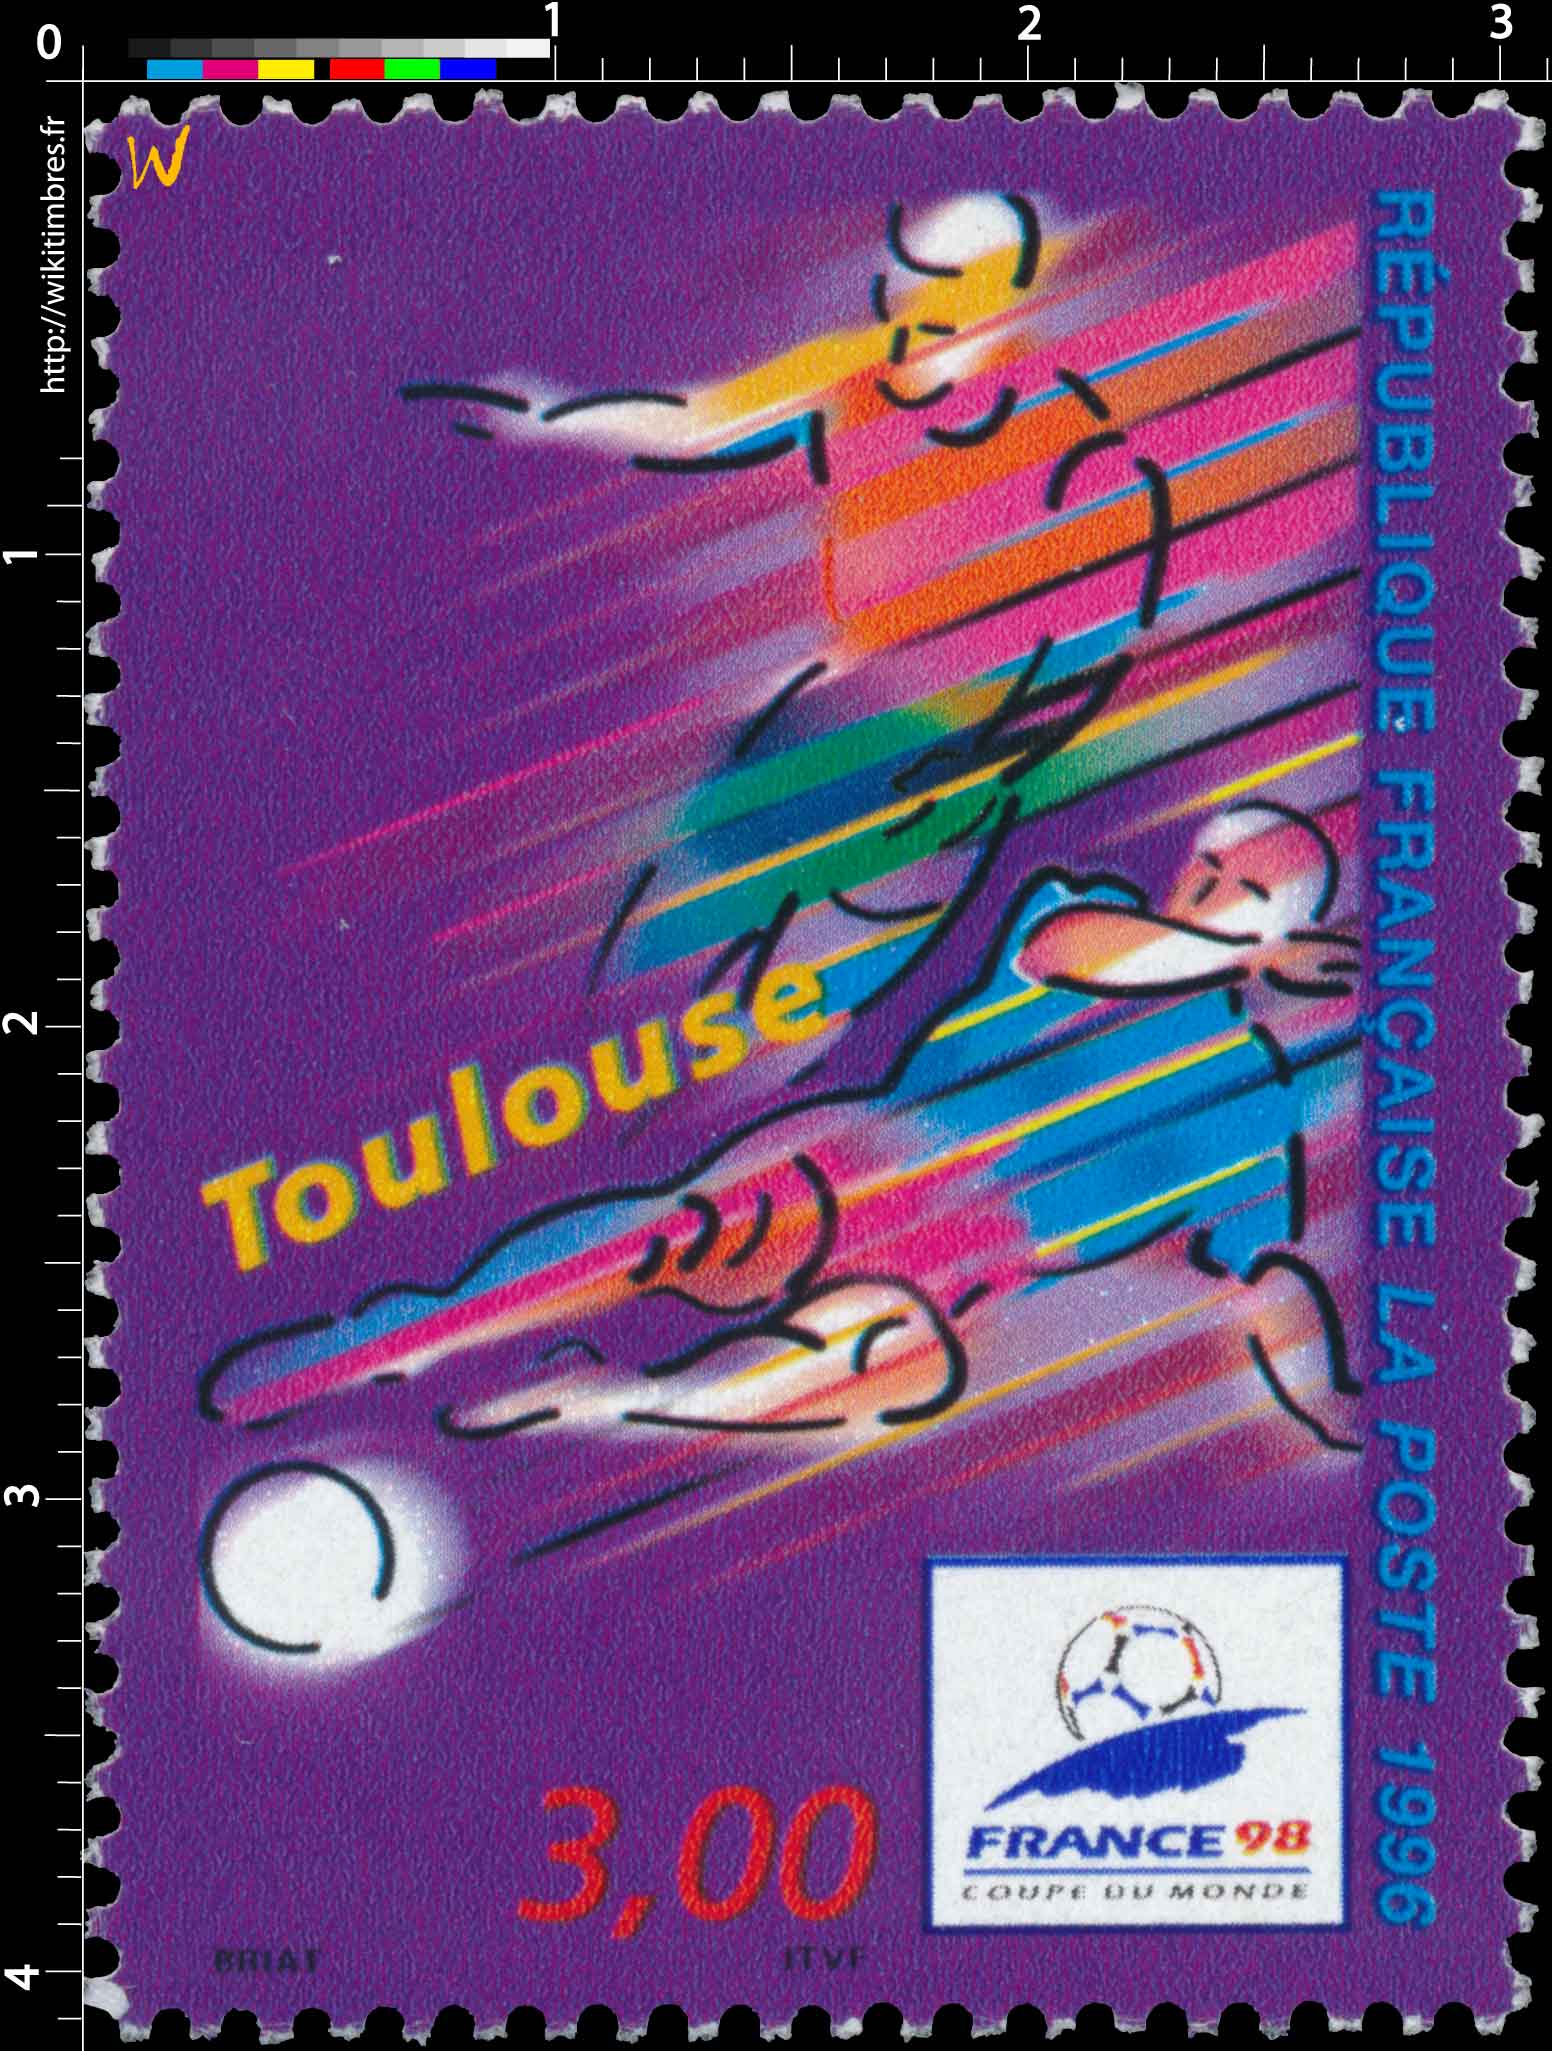 1996 FRANCE 98 Toulouse